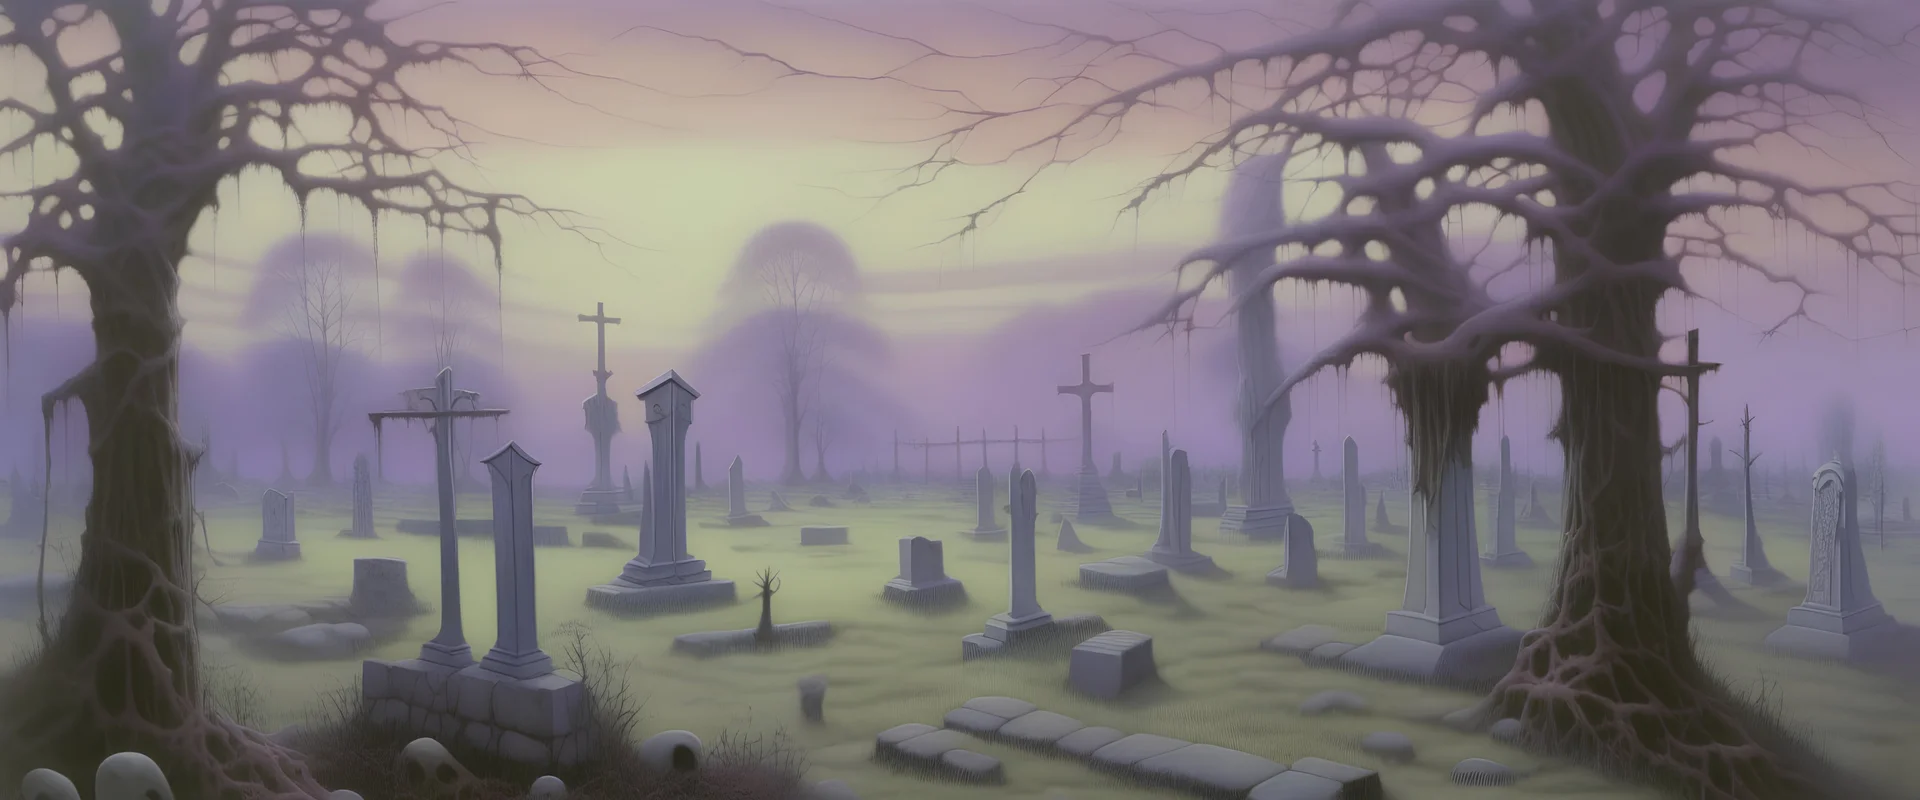 A light purple haunted graveyard filled with ghosts painted by Caspar David Friedrich